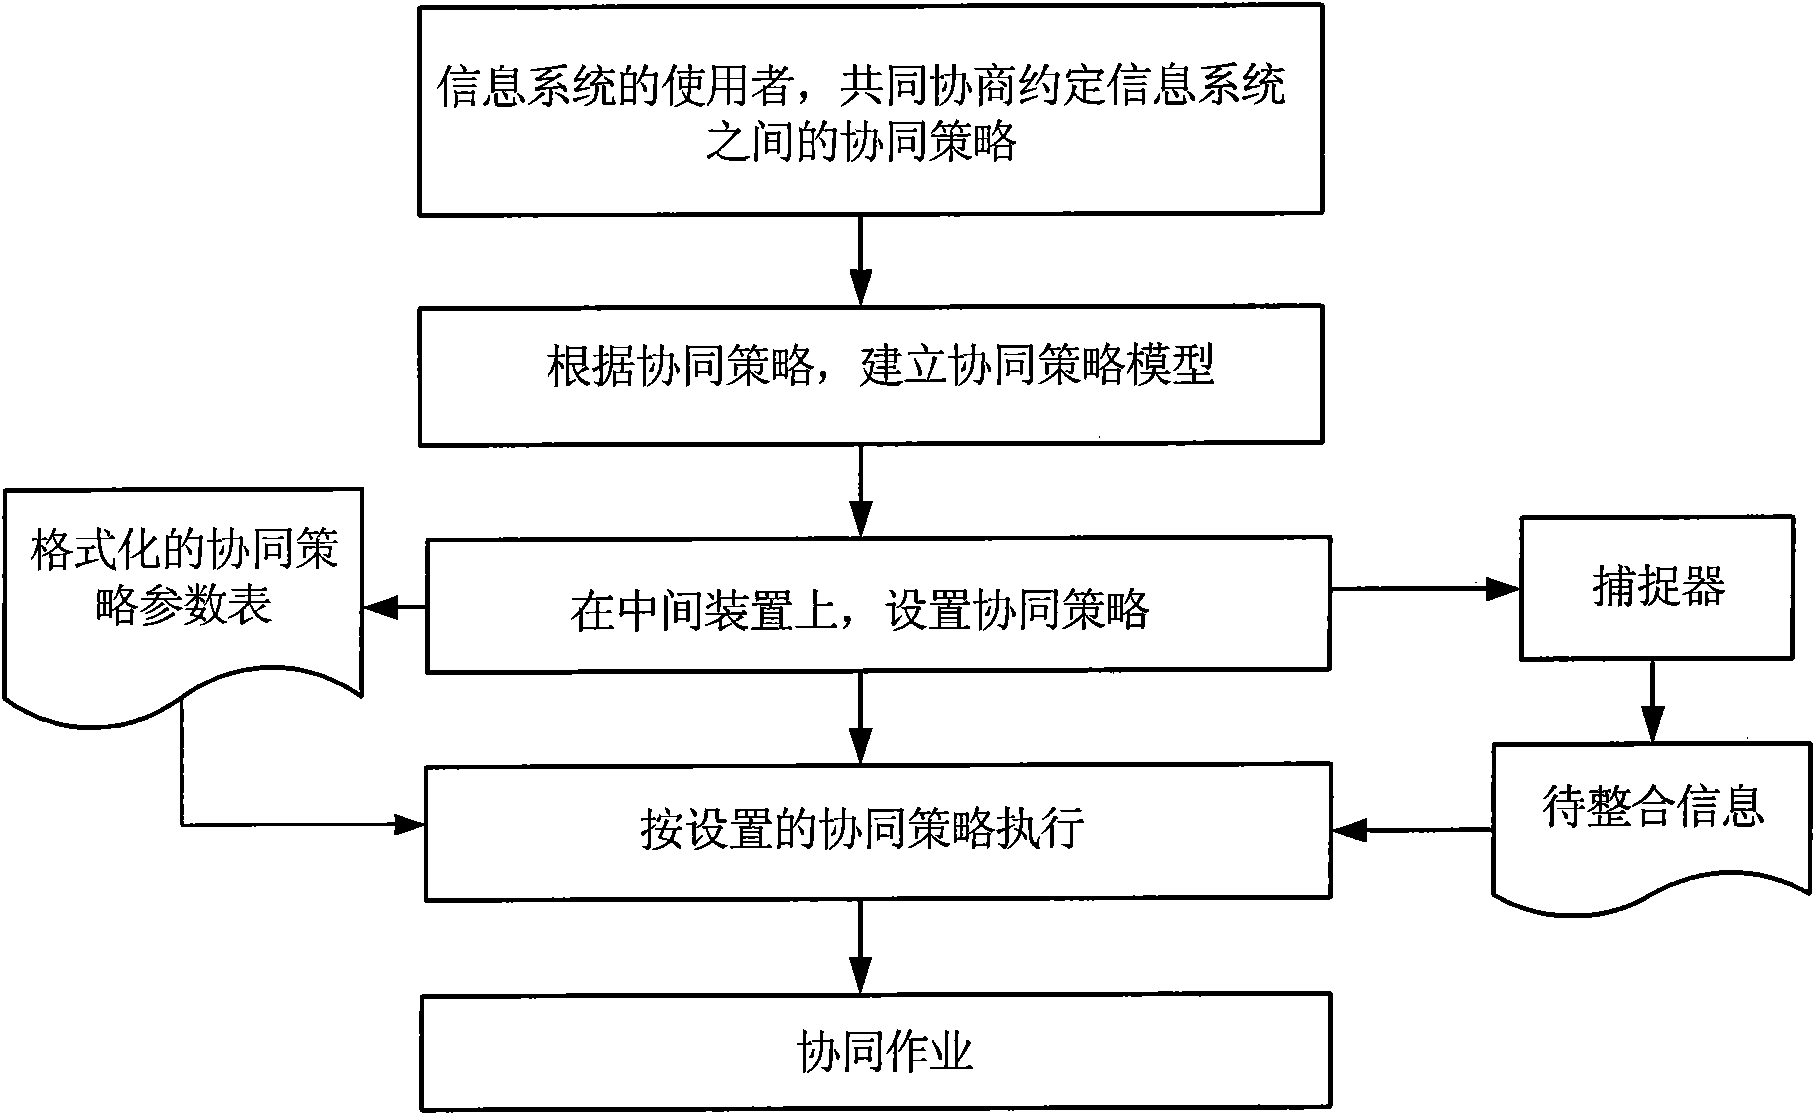 Method and device for collaborative operation of information systems